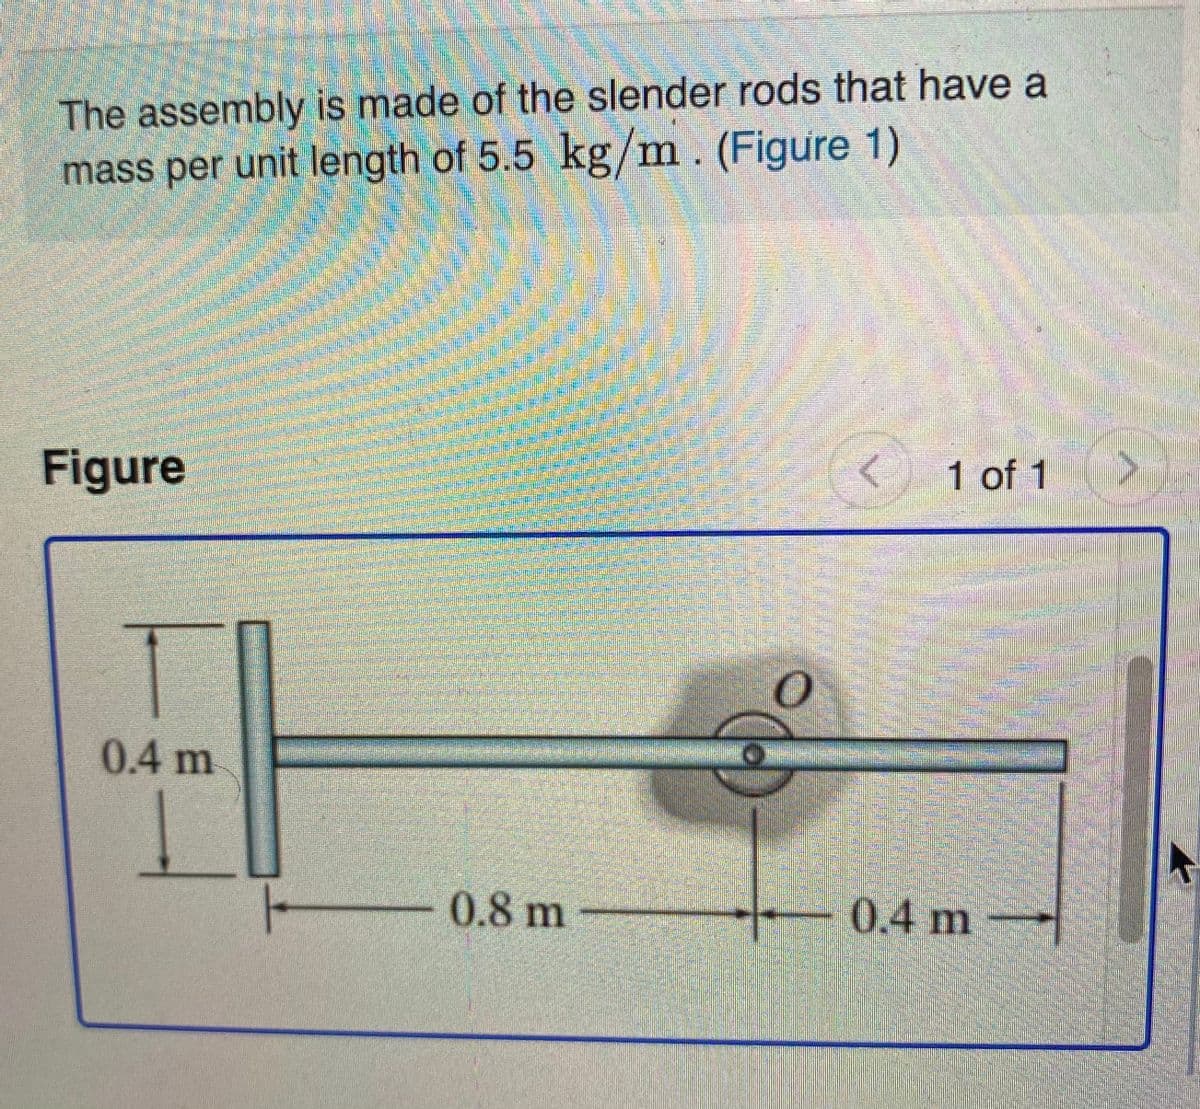 The assembly is made of the slender rods that have a
mass per unit length of 5.5 kg/m. (Figure 1)
Figure
1 of 1
0.4 m
-0.8 m-
0.4 m
